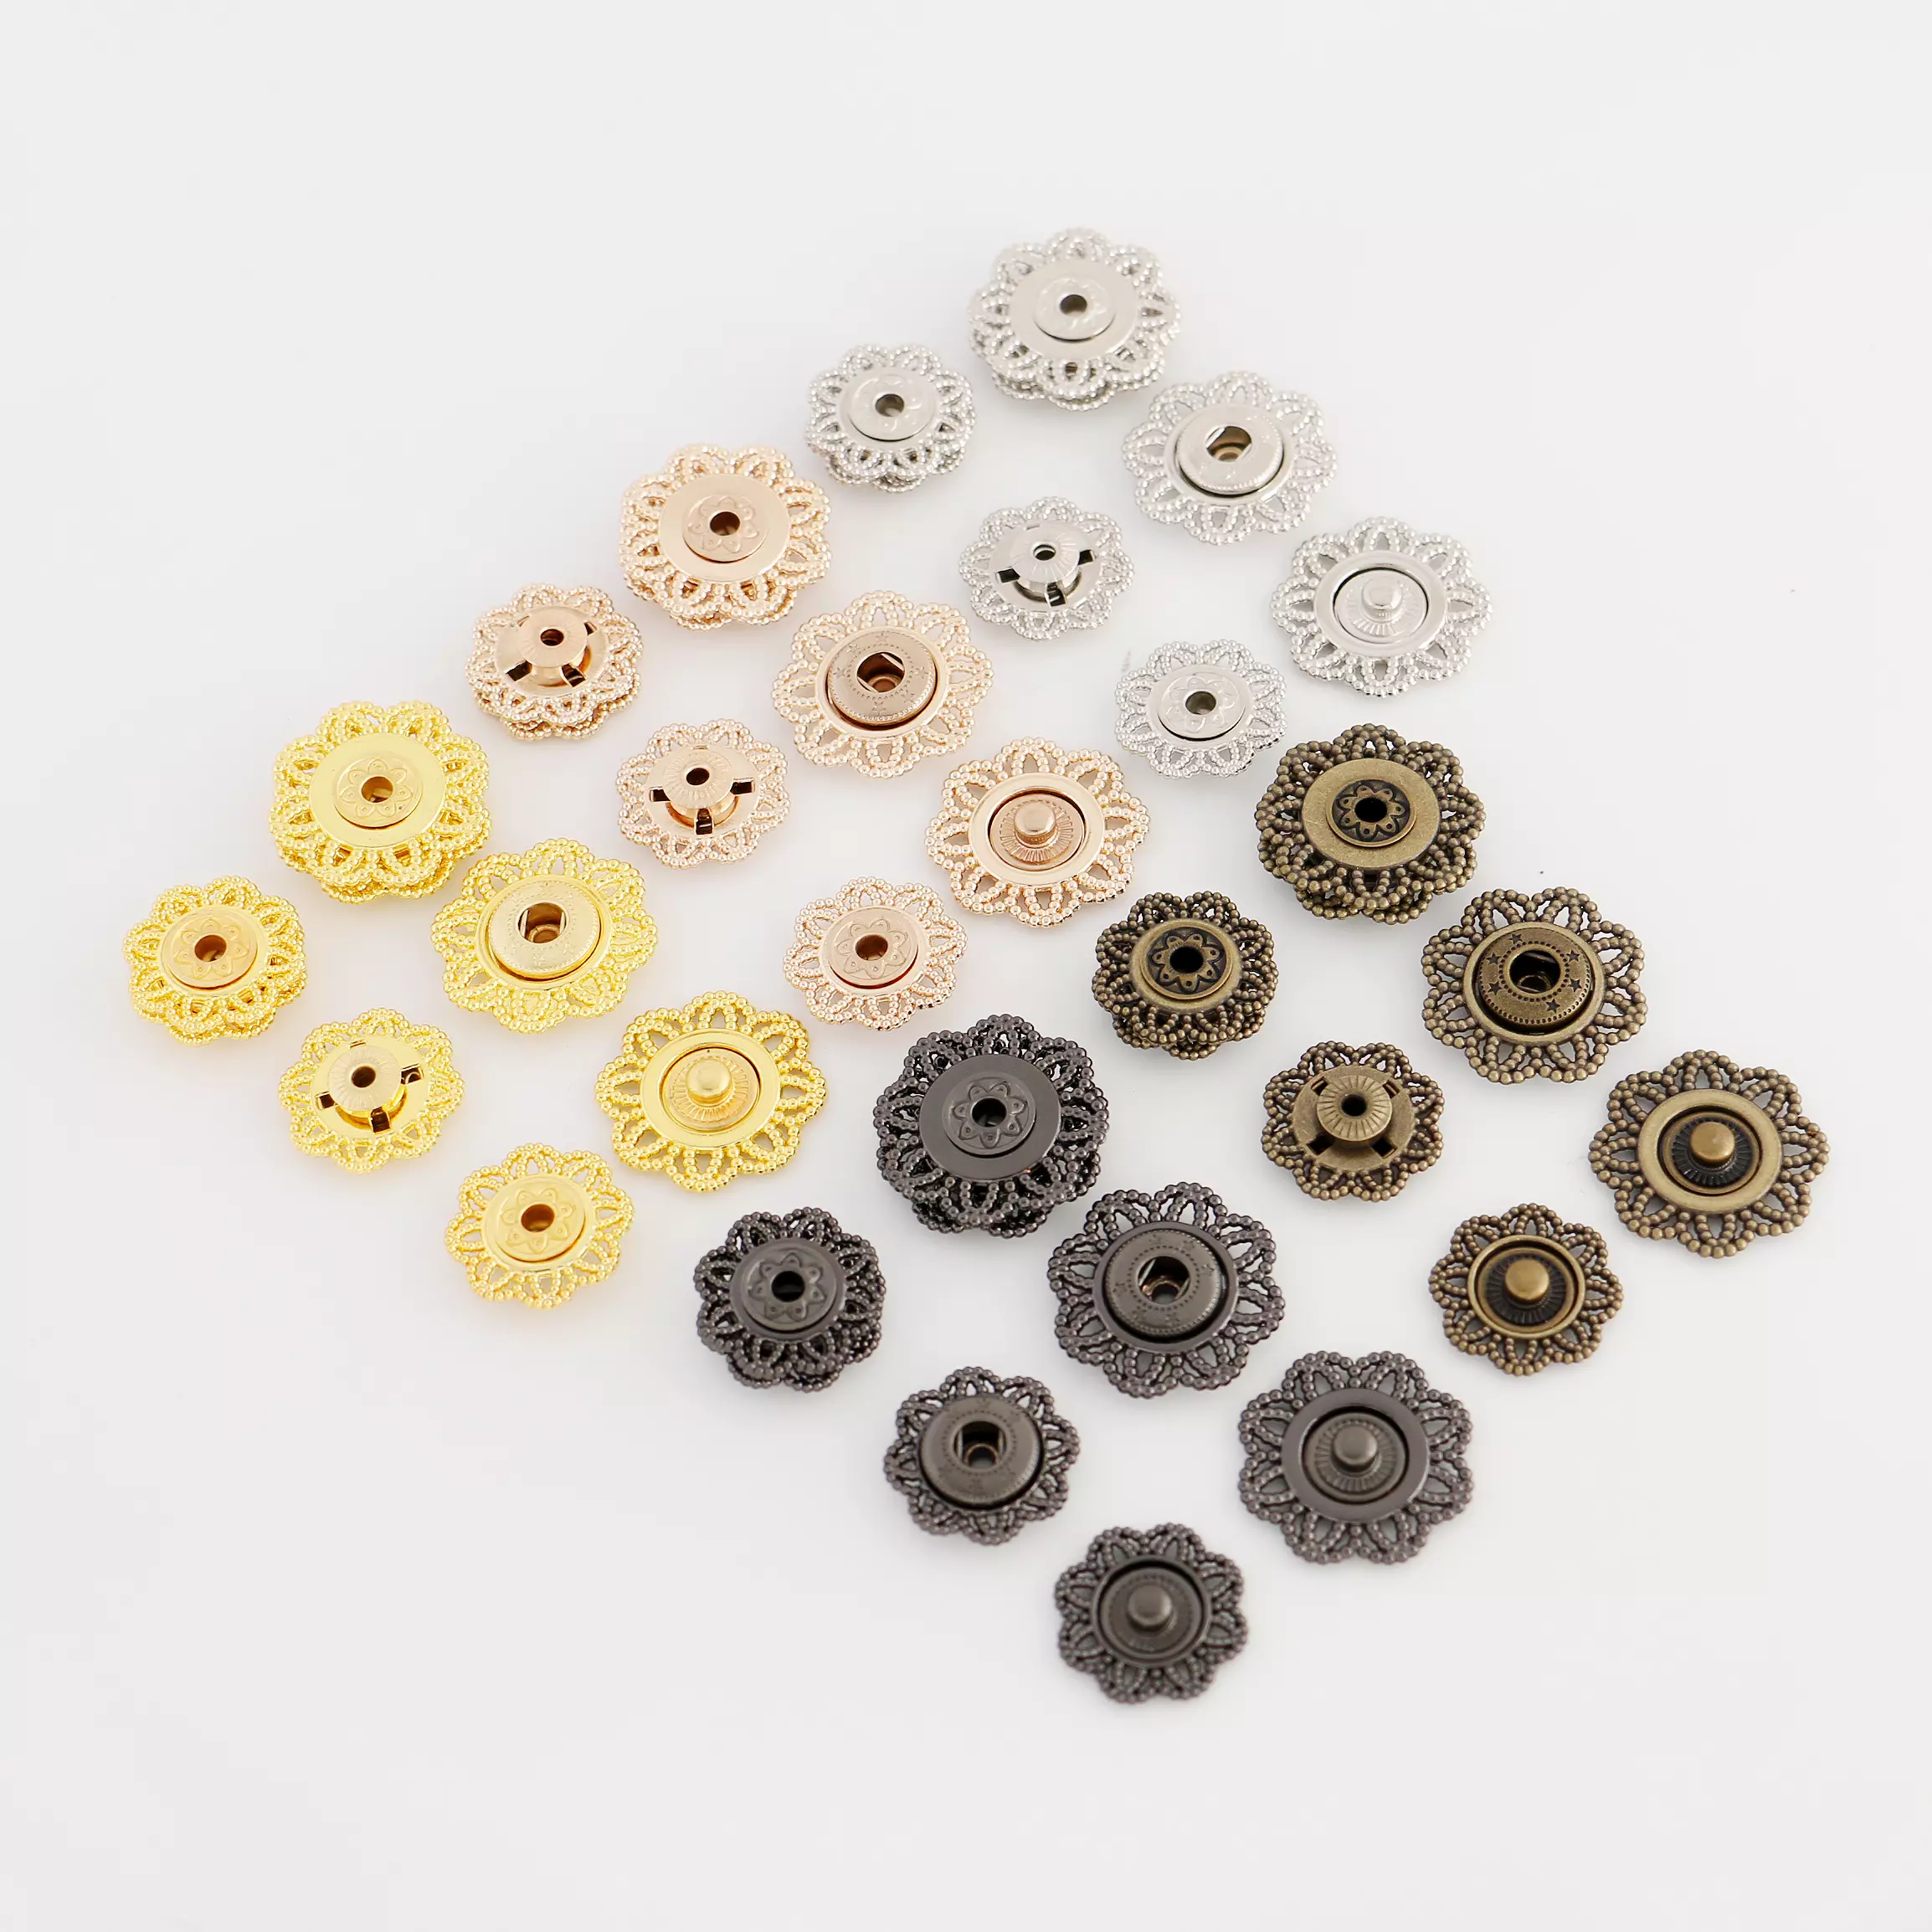 Alloy Stud Fasteners Snap Kit Clothing Snaps Button